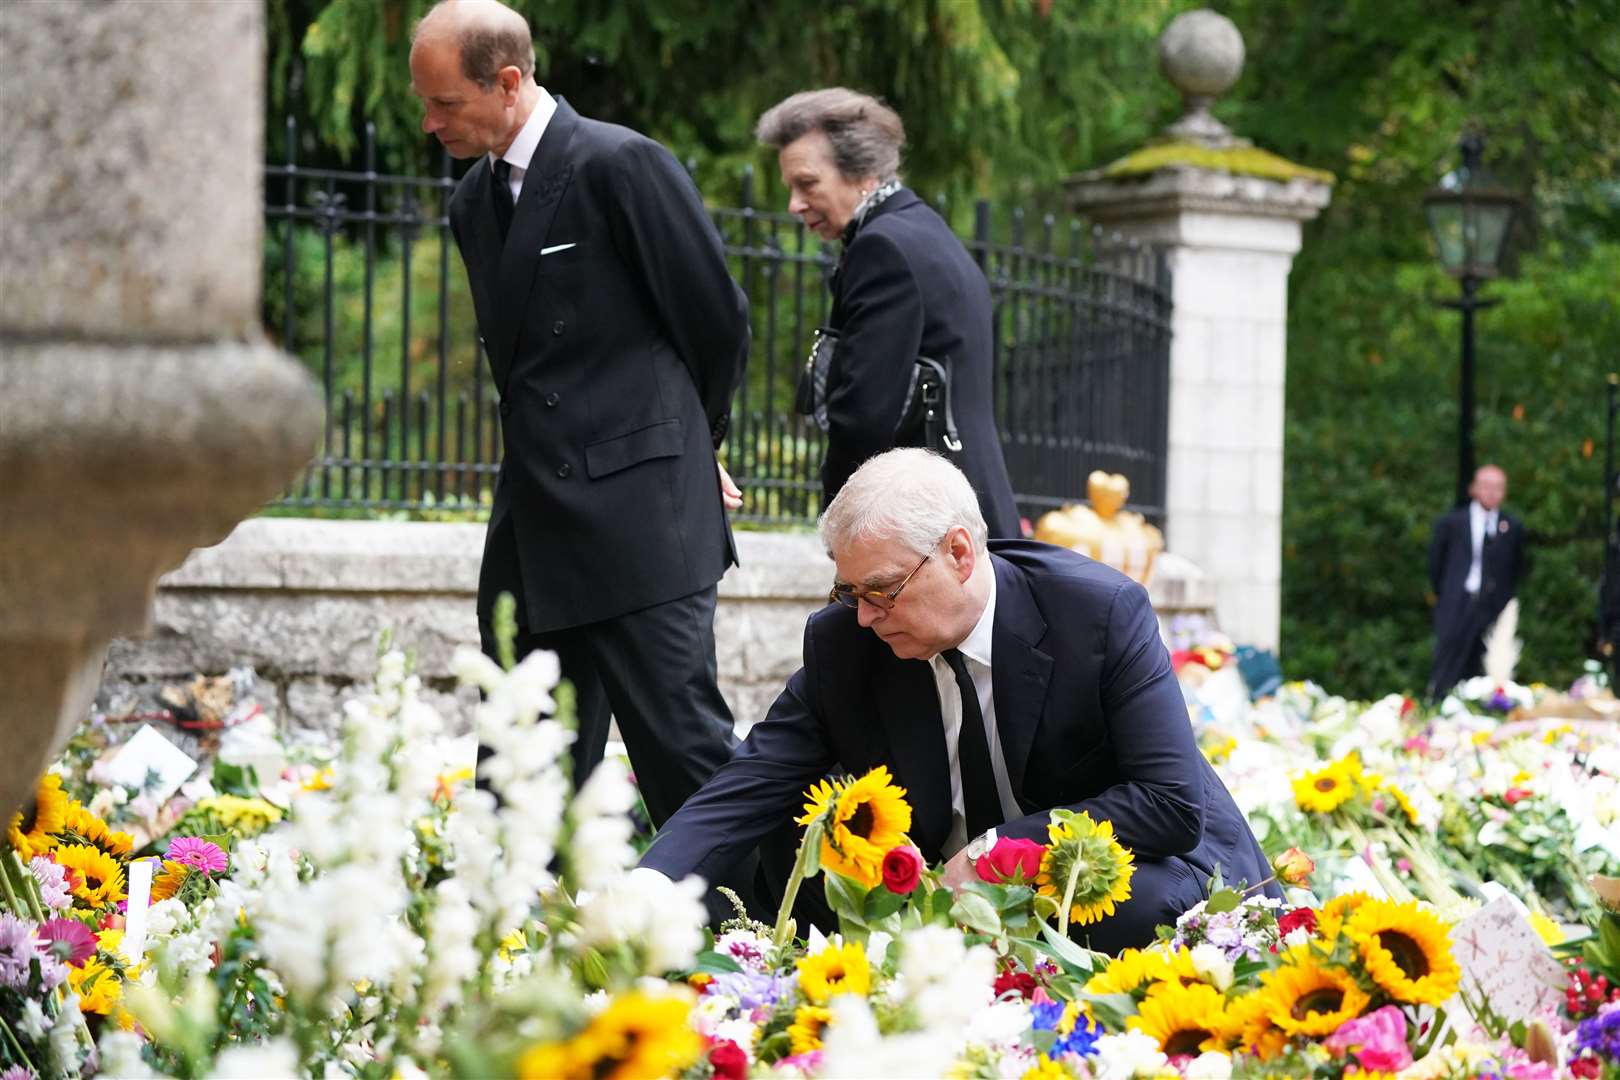 The Duke of York, Earl of Wessex and Princess Royal view the messages and floral tributes left by members of the public outside Balmoral Castle (Owen Humphreys/PA)